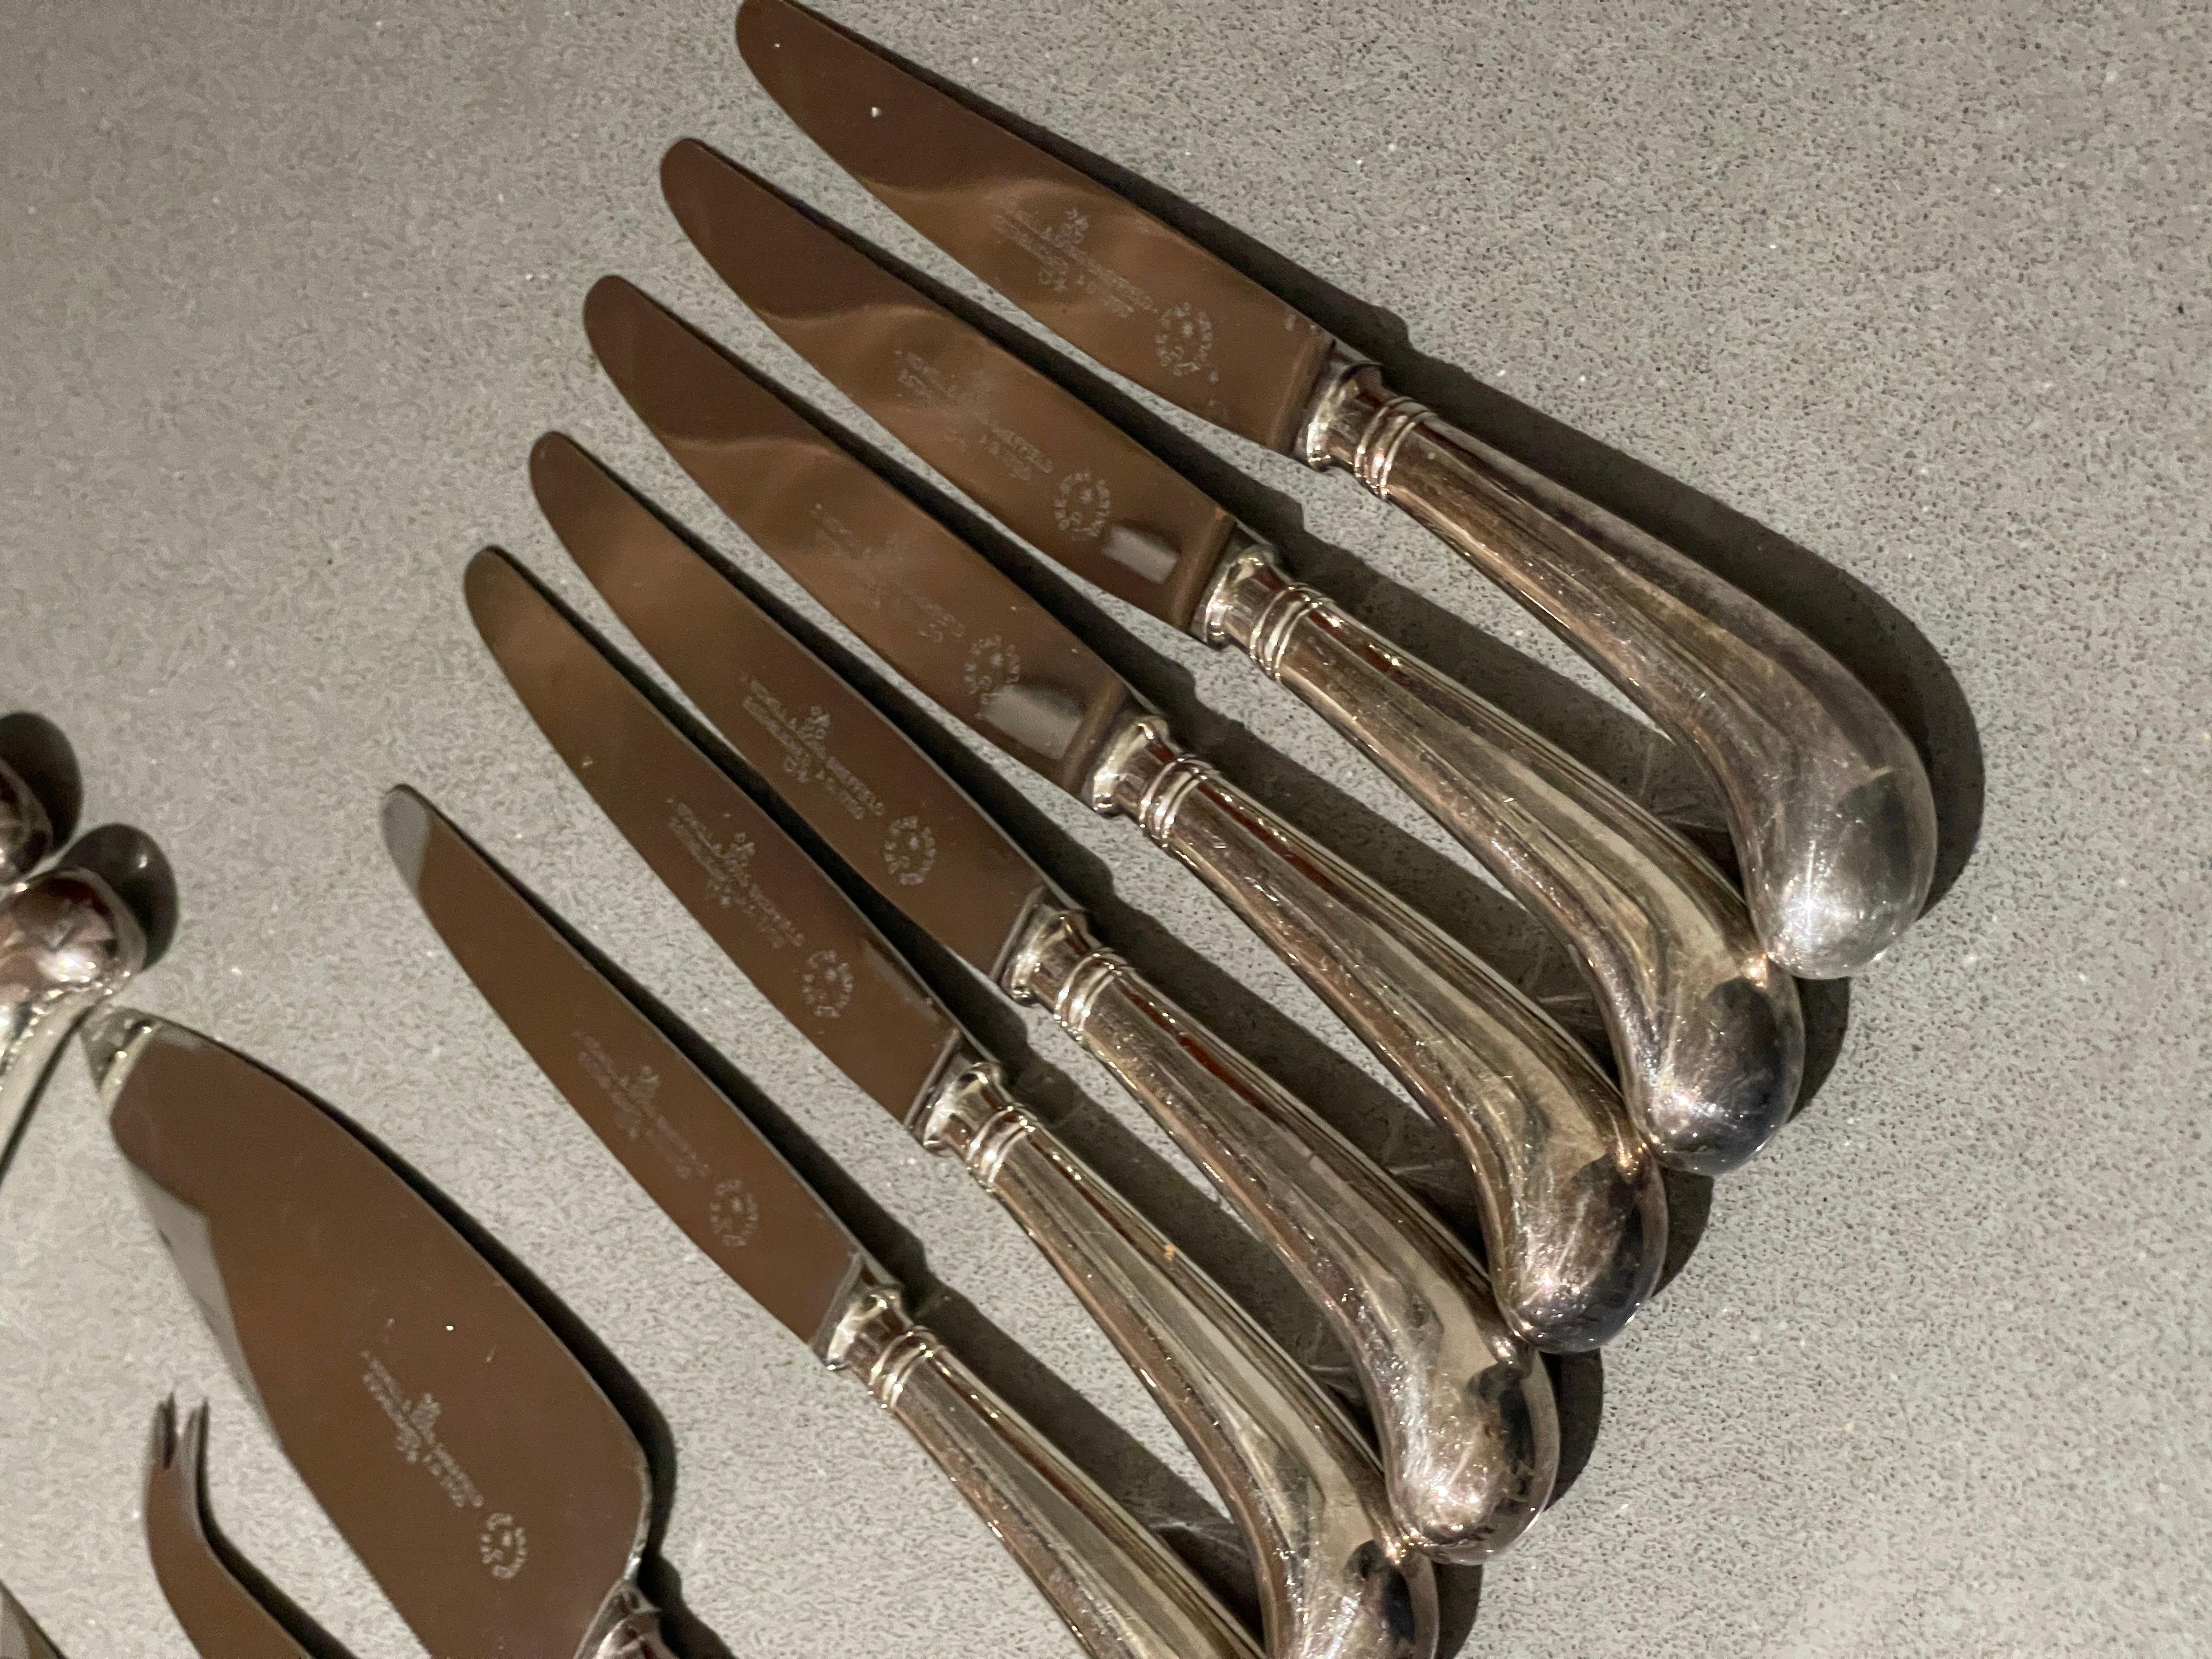 Vintage Sheffield table knife and fork set of 37 items, as shown in the pictures, stainless steel, with unique handles.
This vintage set of fine Sheffield cutlery knives and forks is done in stainless steel and porcelain handles.
The handles fit